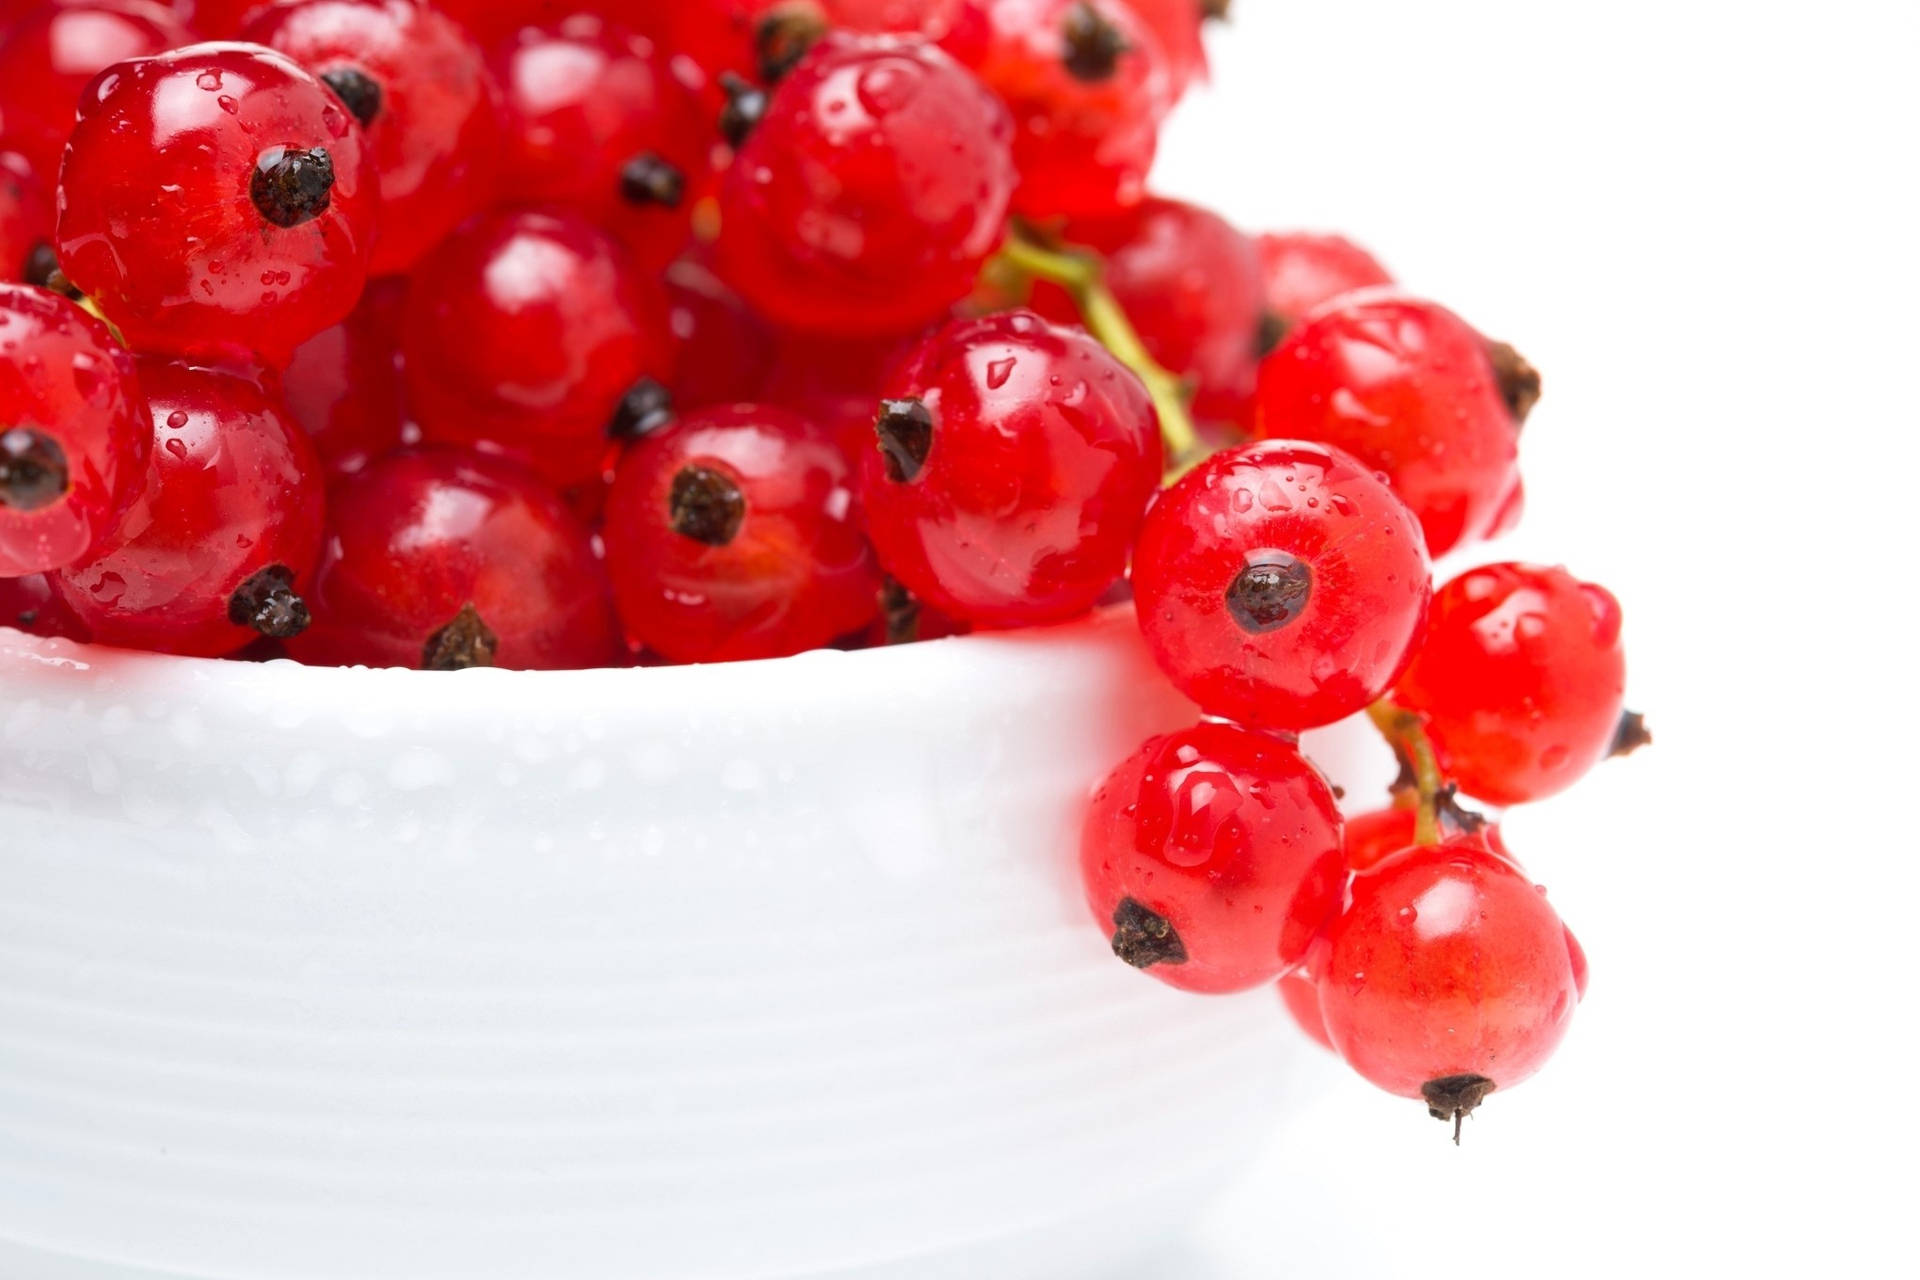 Red Currant Berries Fruit In A Bowl Wallpaper